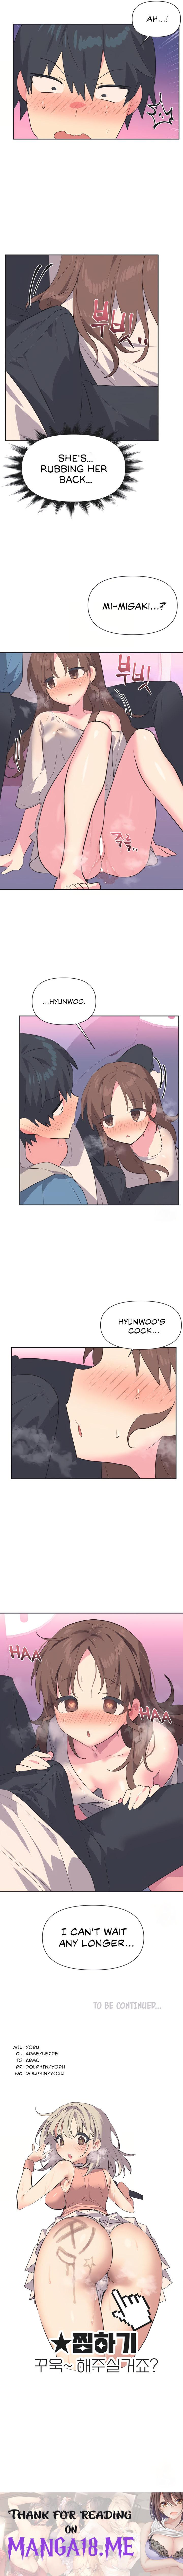 Idol’s Mating - Chapter 6 Page 9